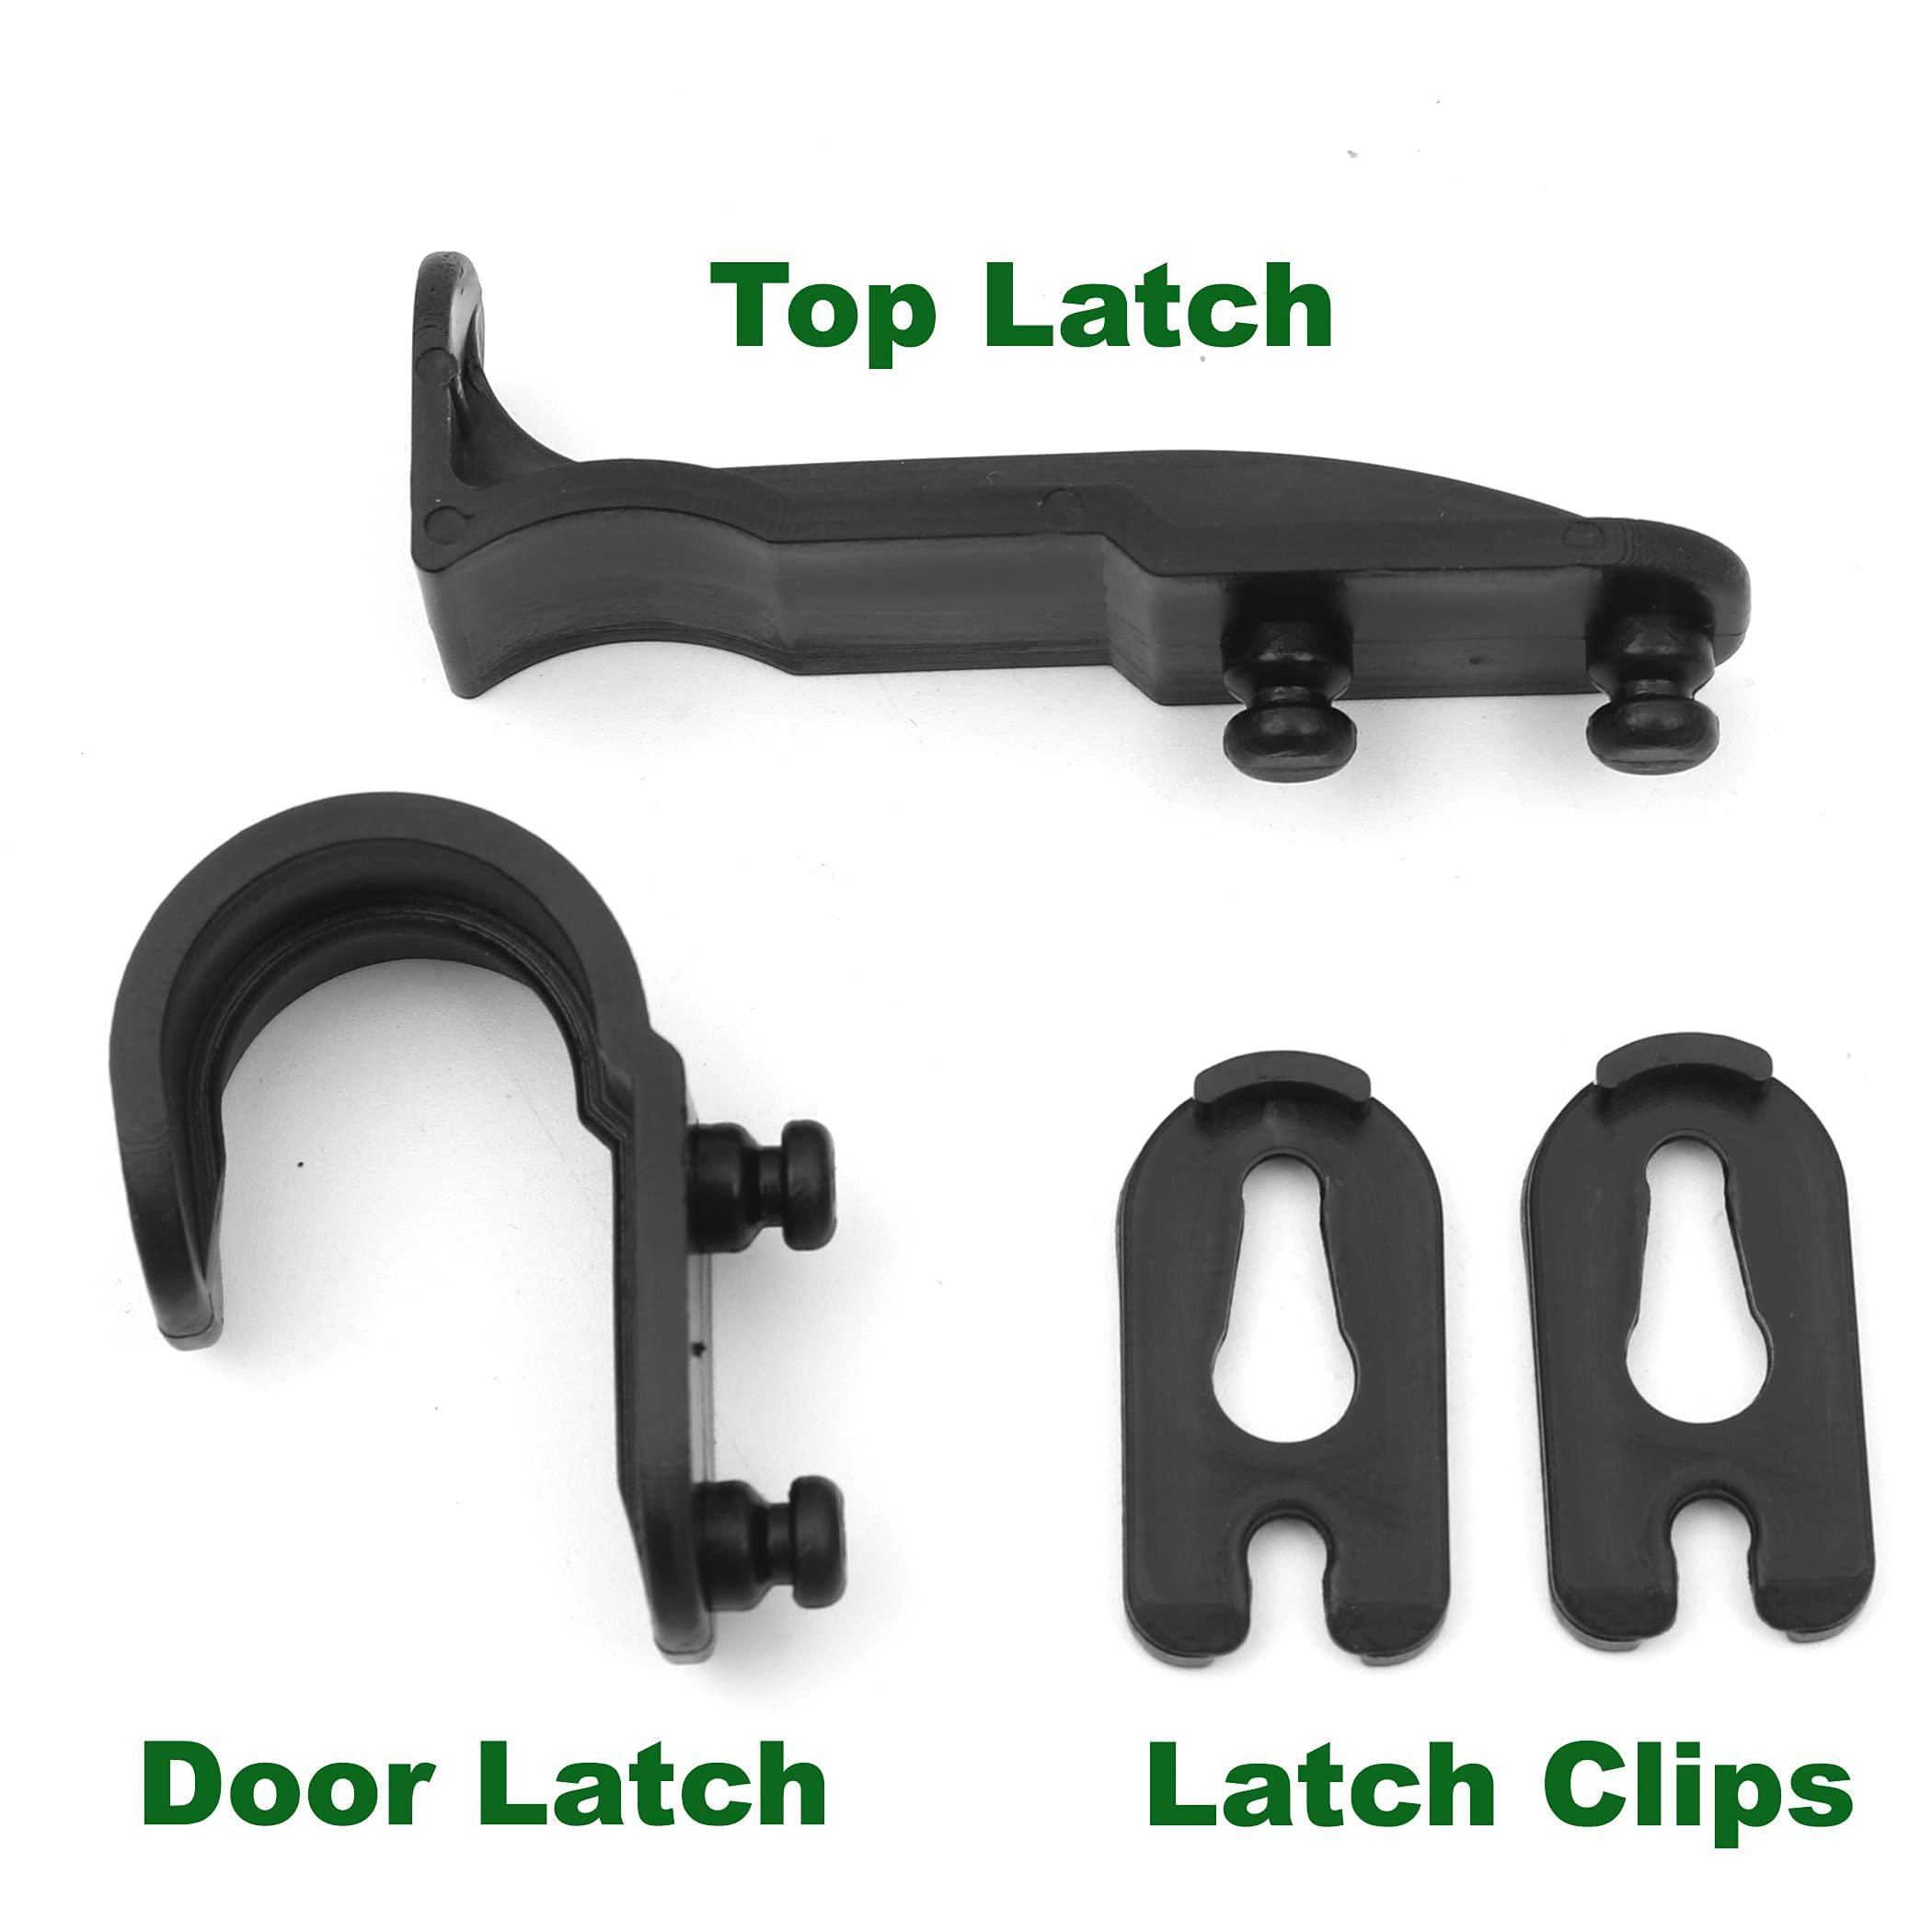 Tongass latch replacement set kit for mailbox repair - top latch, door latch, 2 latch clips, compatible with group standard mailboxes